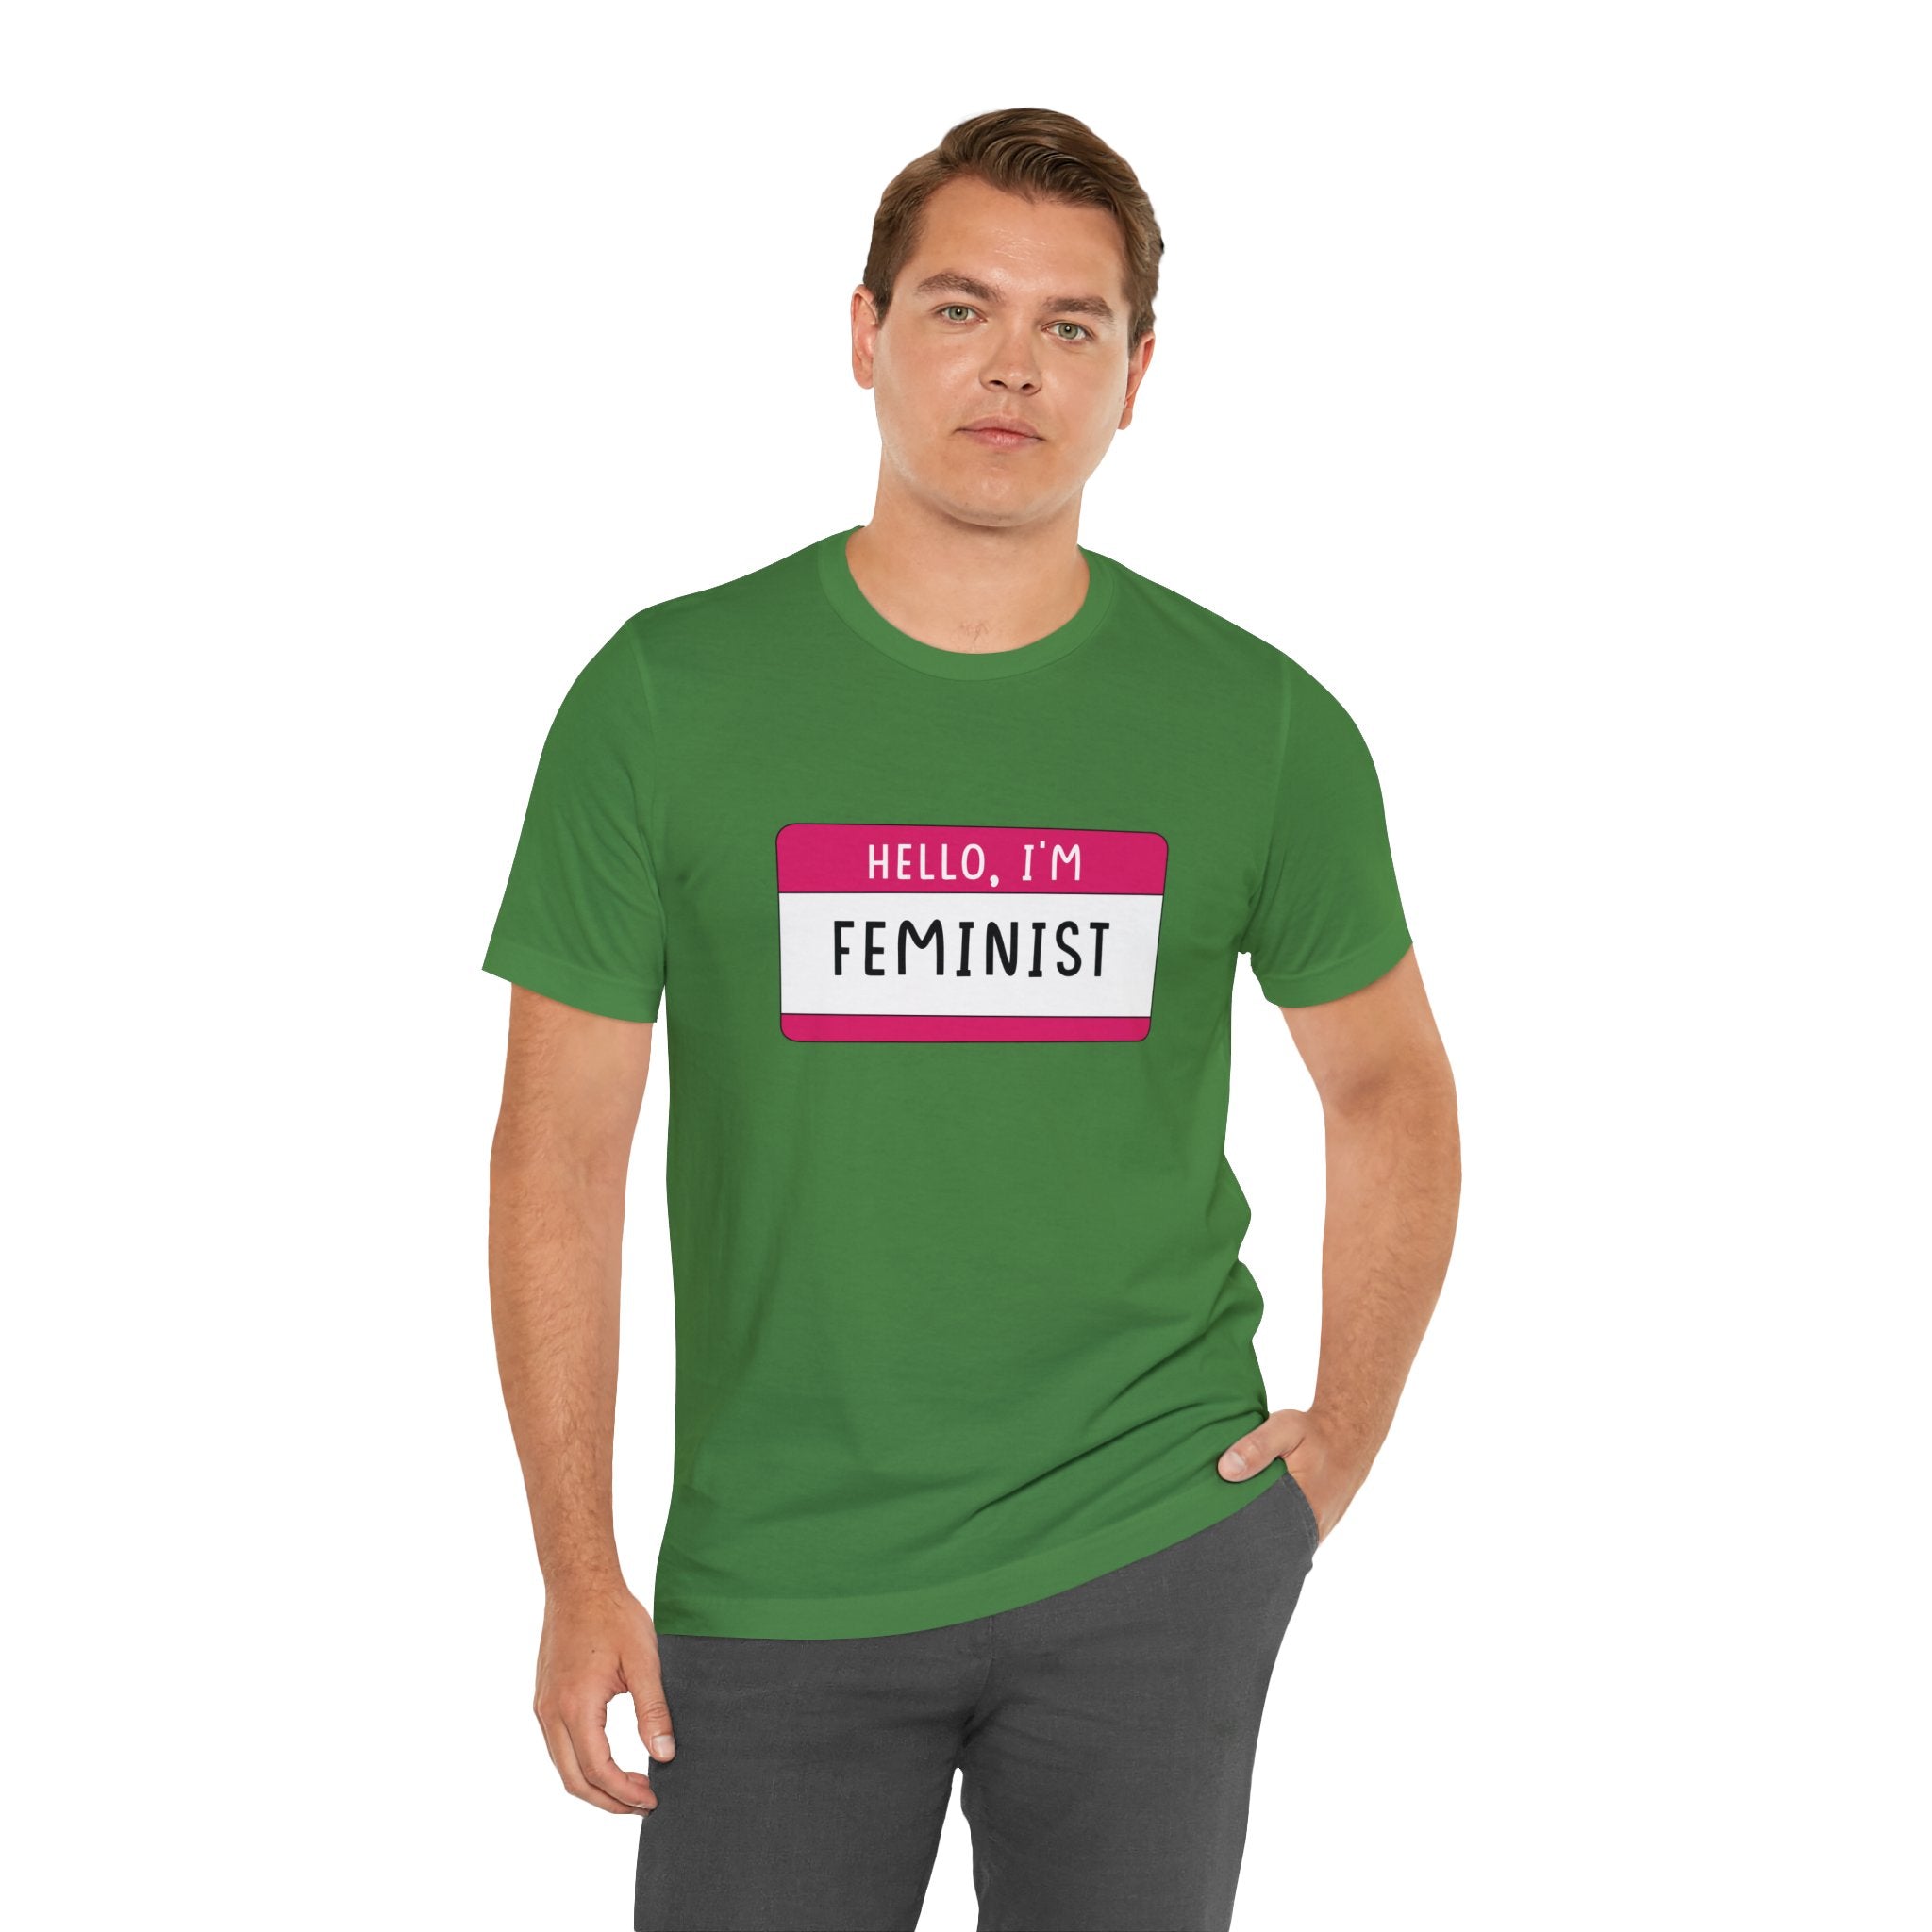 Man in a green Hello, I'm Feminist T-Shirt with a "hello, i'm feminist" badge design, standing against a white background.